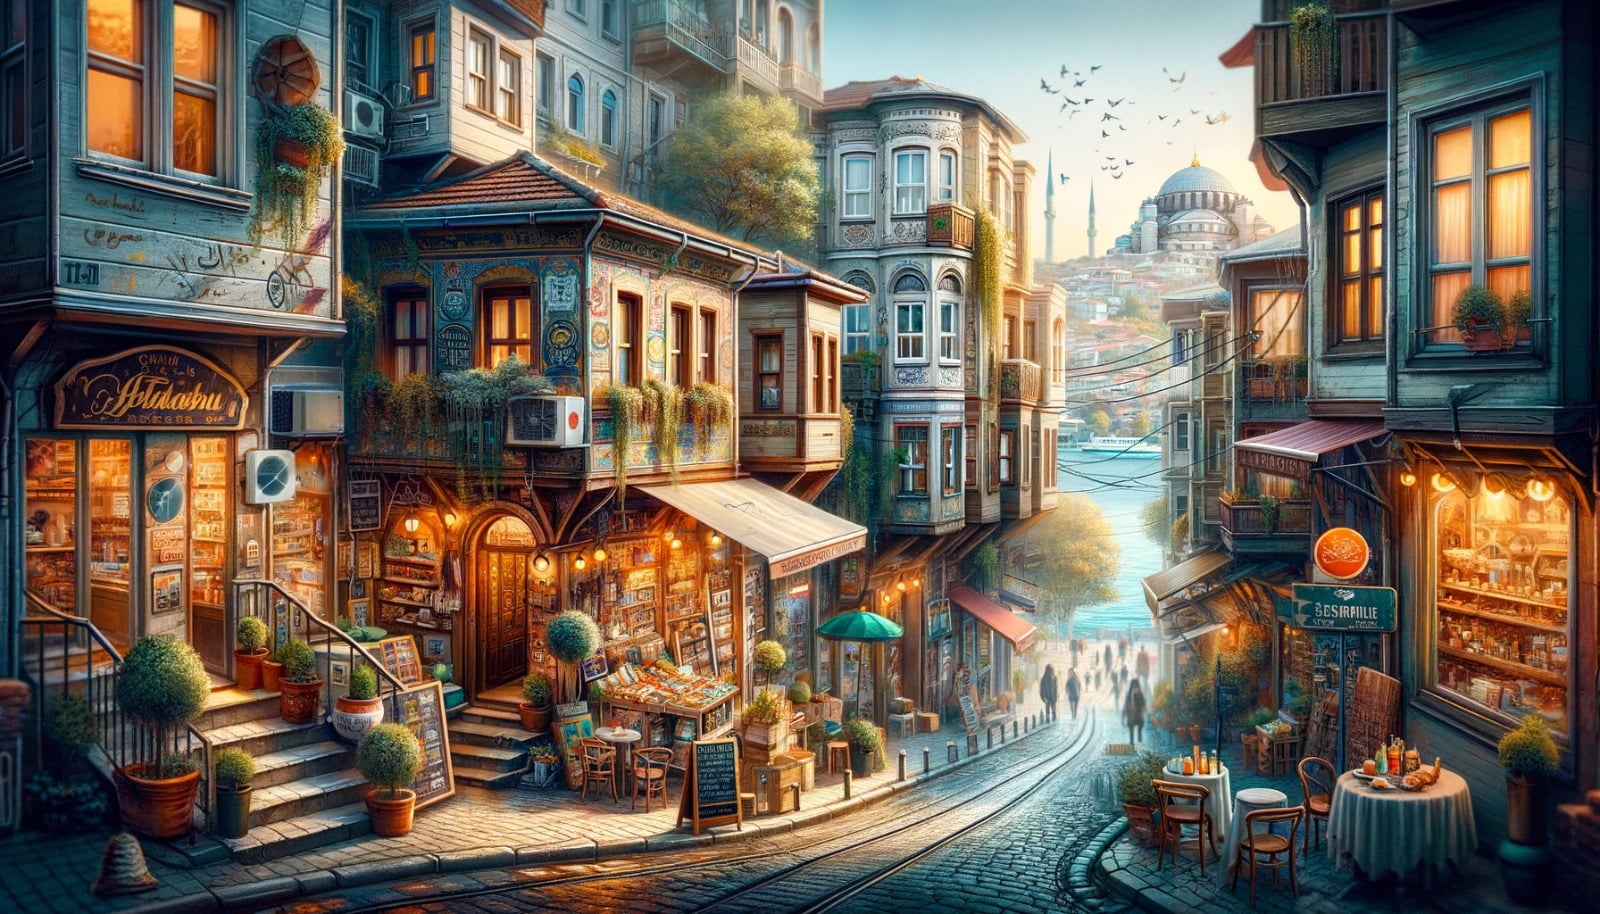 A mesmerizing painting of a city street, inviting viewers to discover its enchanting allure.